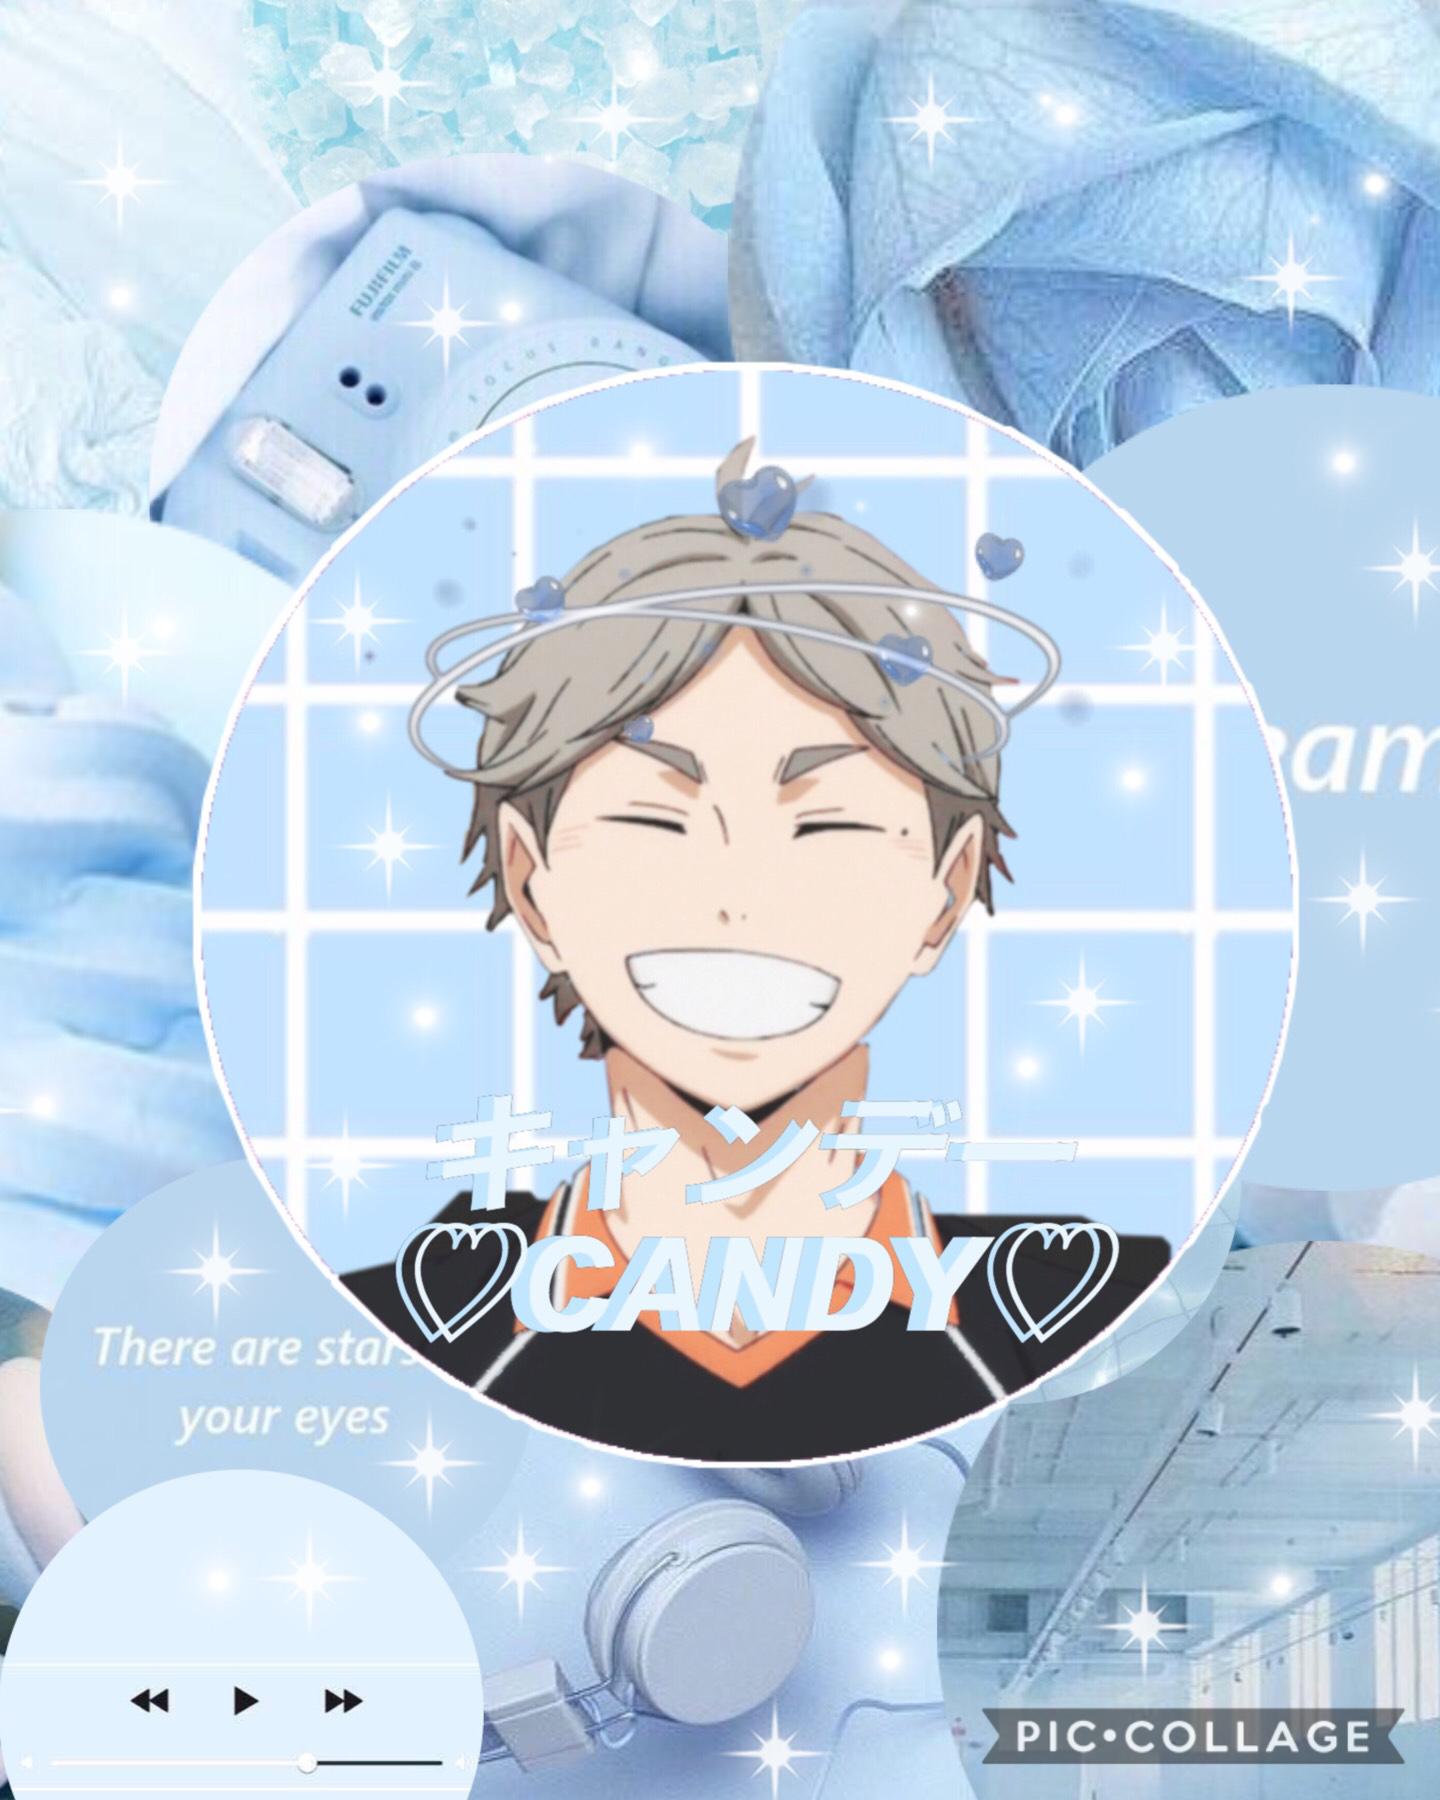 💙✨Everything Is Blue✨💙
Had to do an edit of my fave Haikyuu!! Boi! 
Most of these are just reposts from my insta but DON’T WORRY!!! I will be posting new content